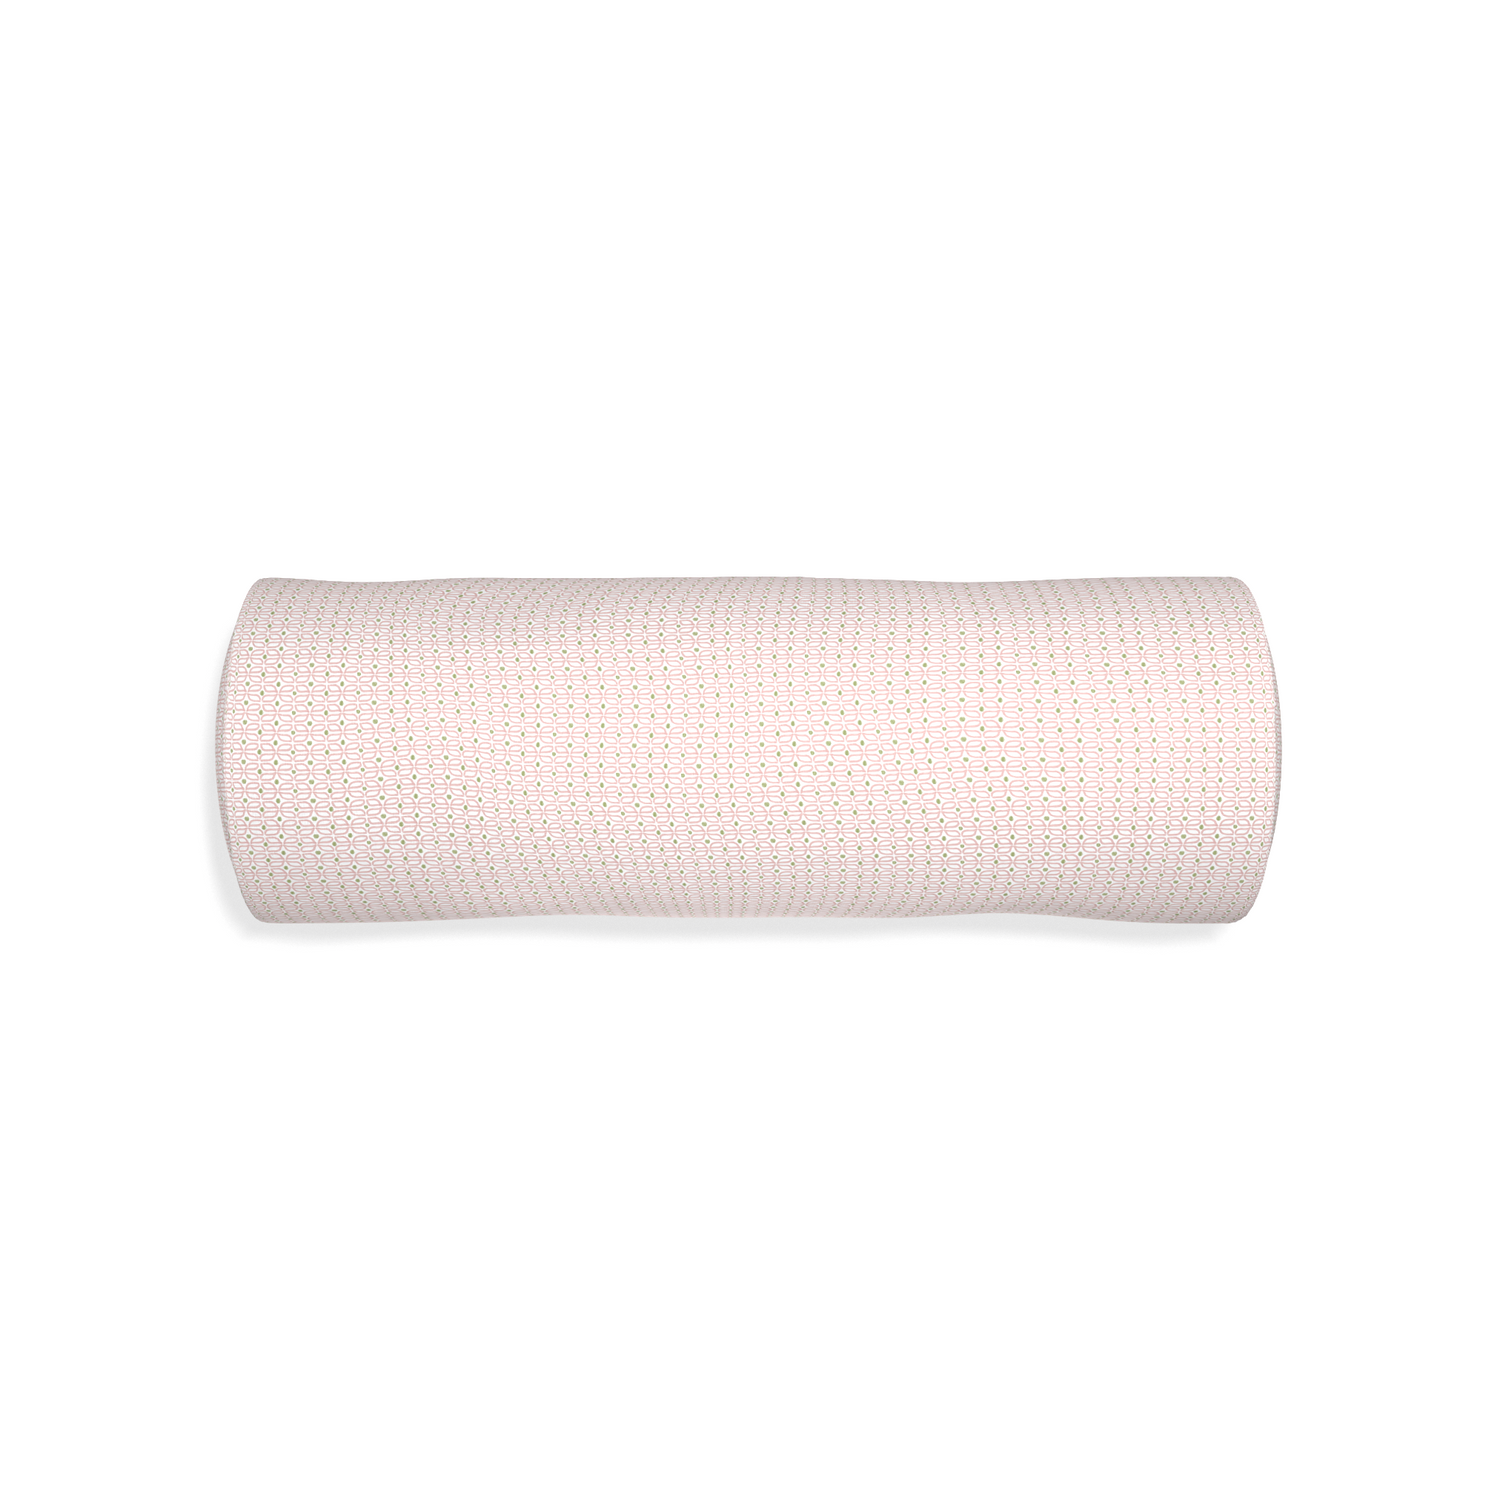 Bolster loomi pink custom pink geometricpillow with none on white background